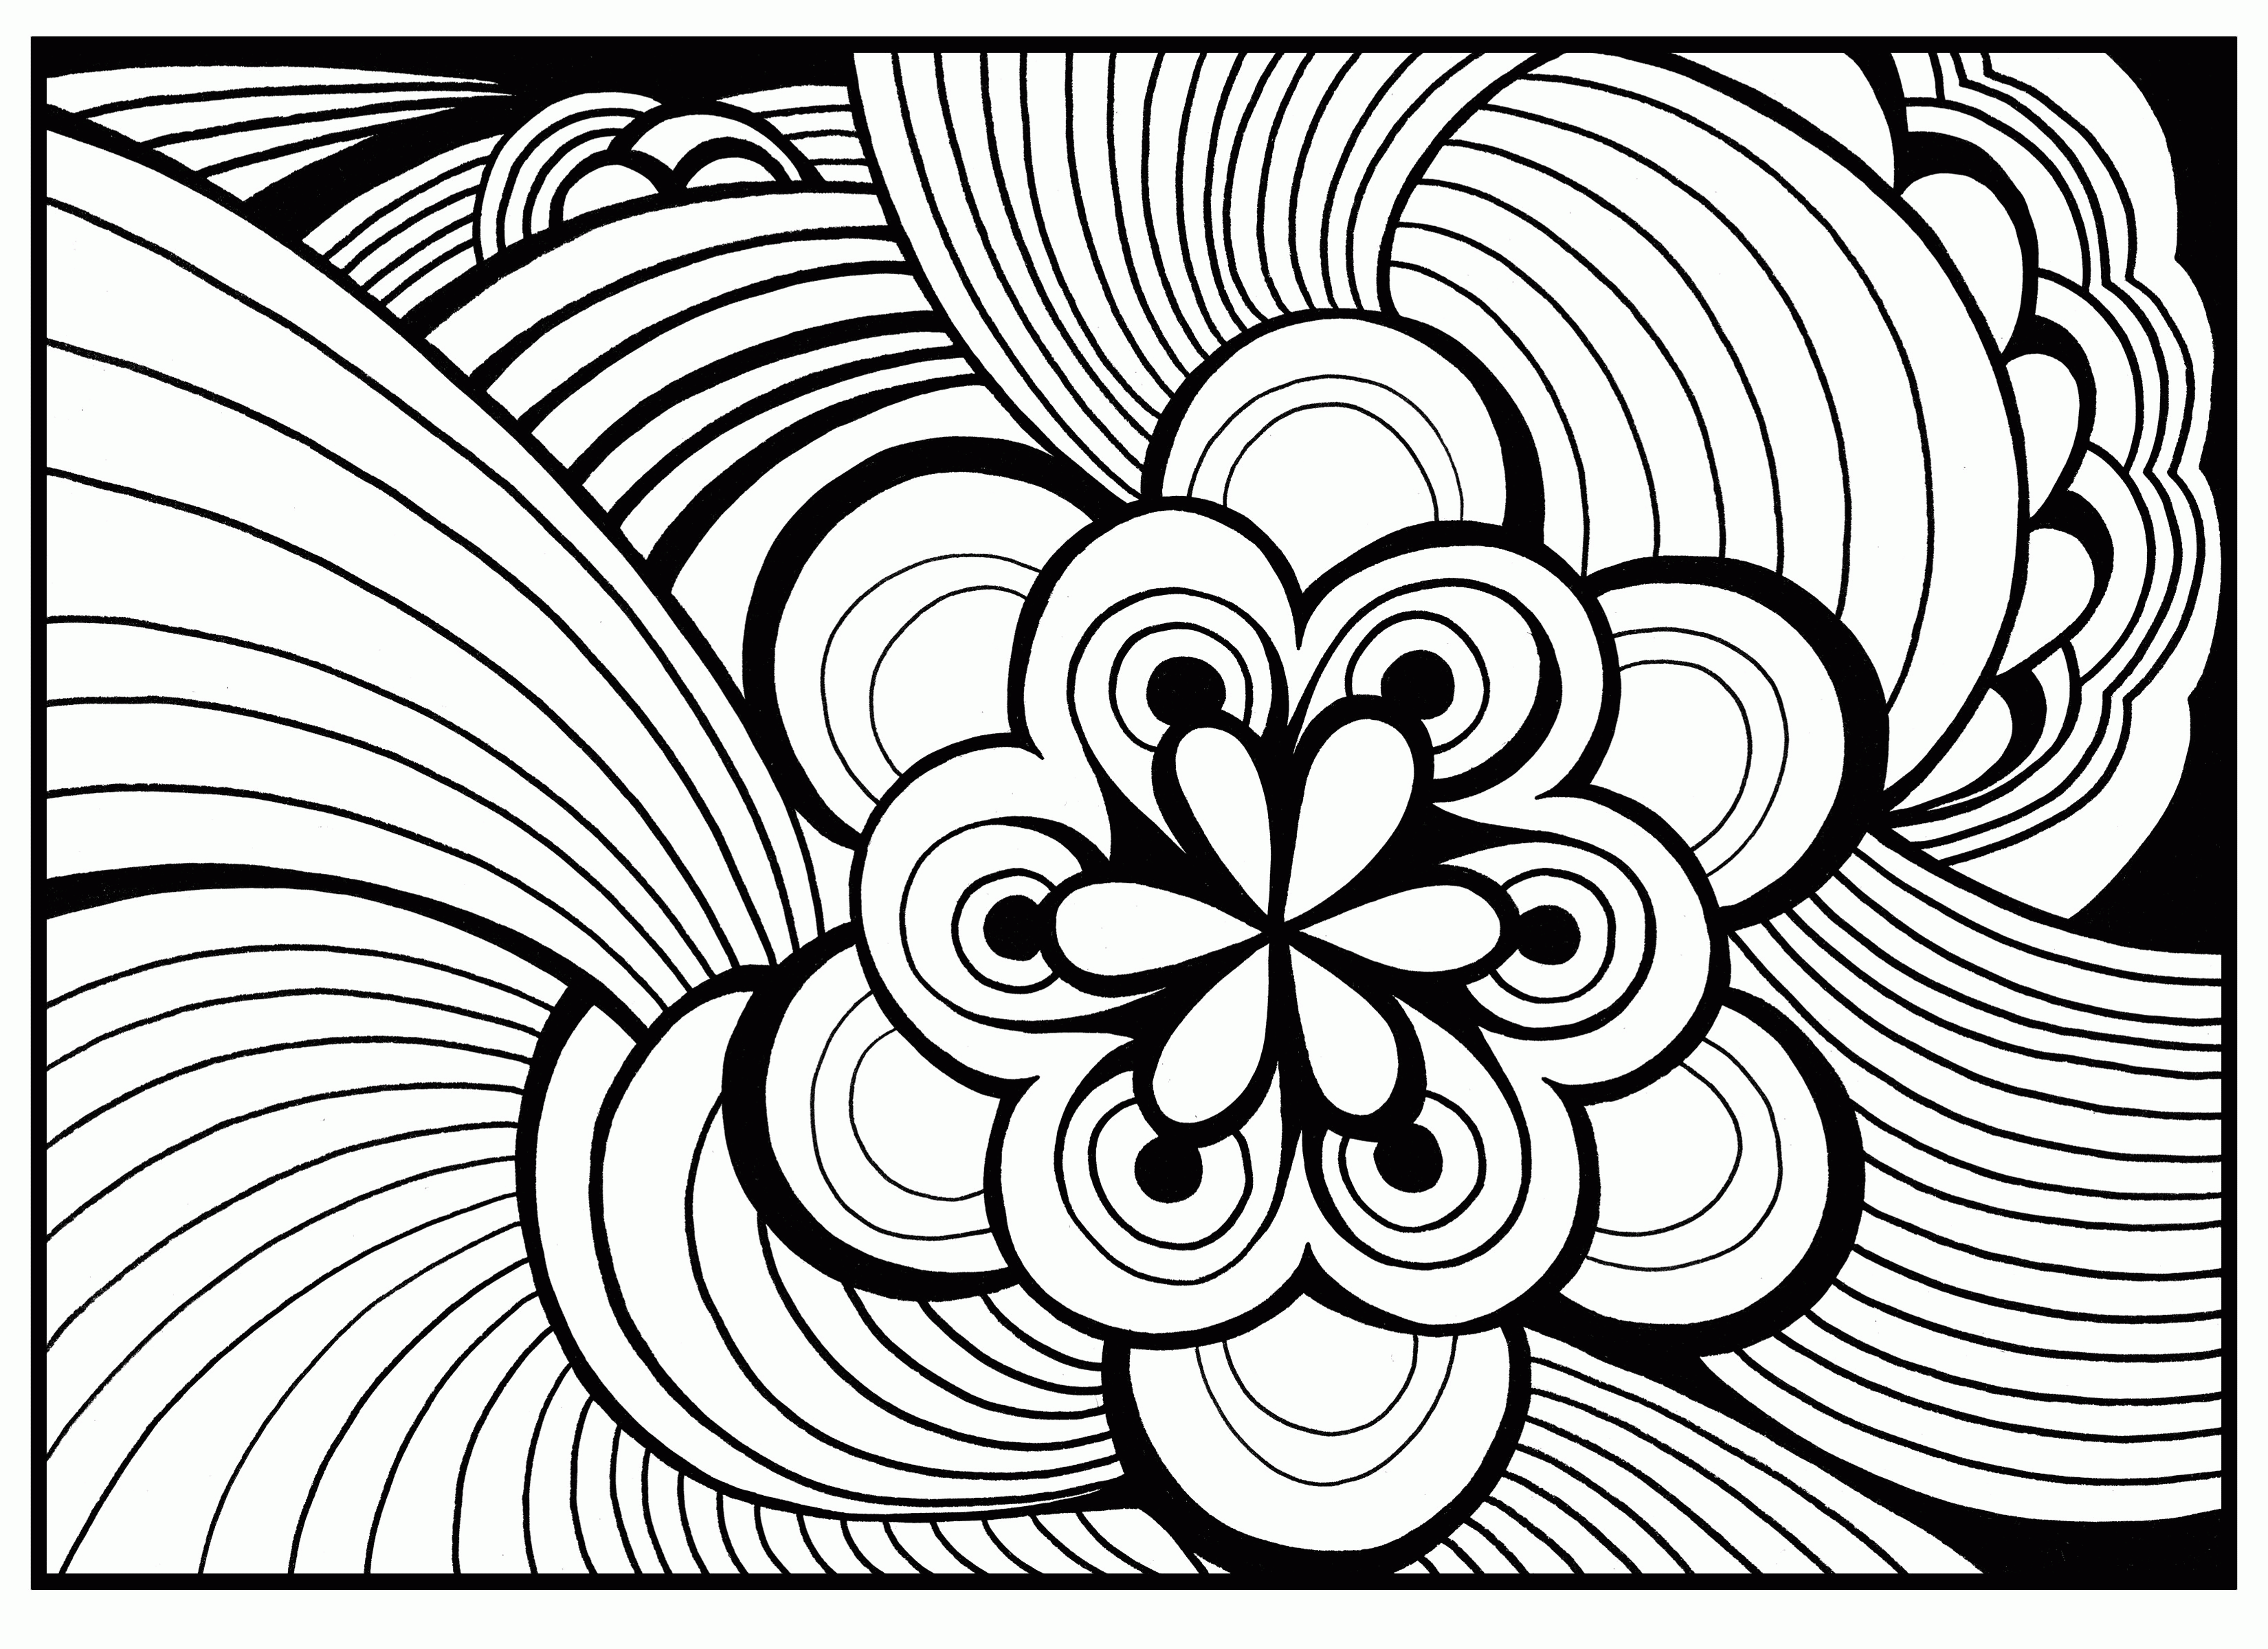 Cool Colouring Pages | Coloring Pages for Kids and for Adults